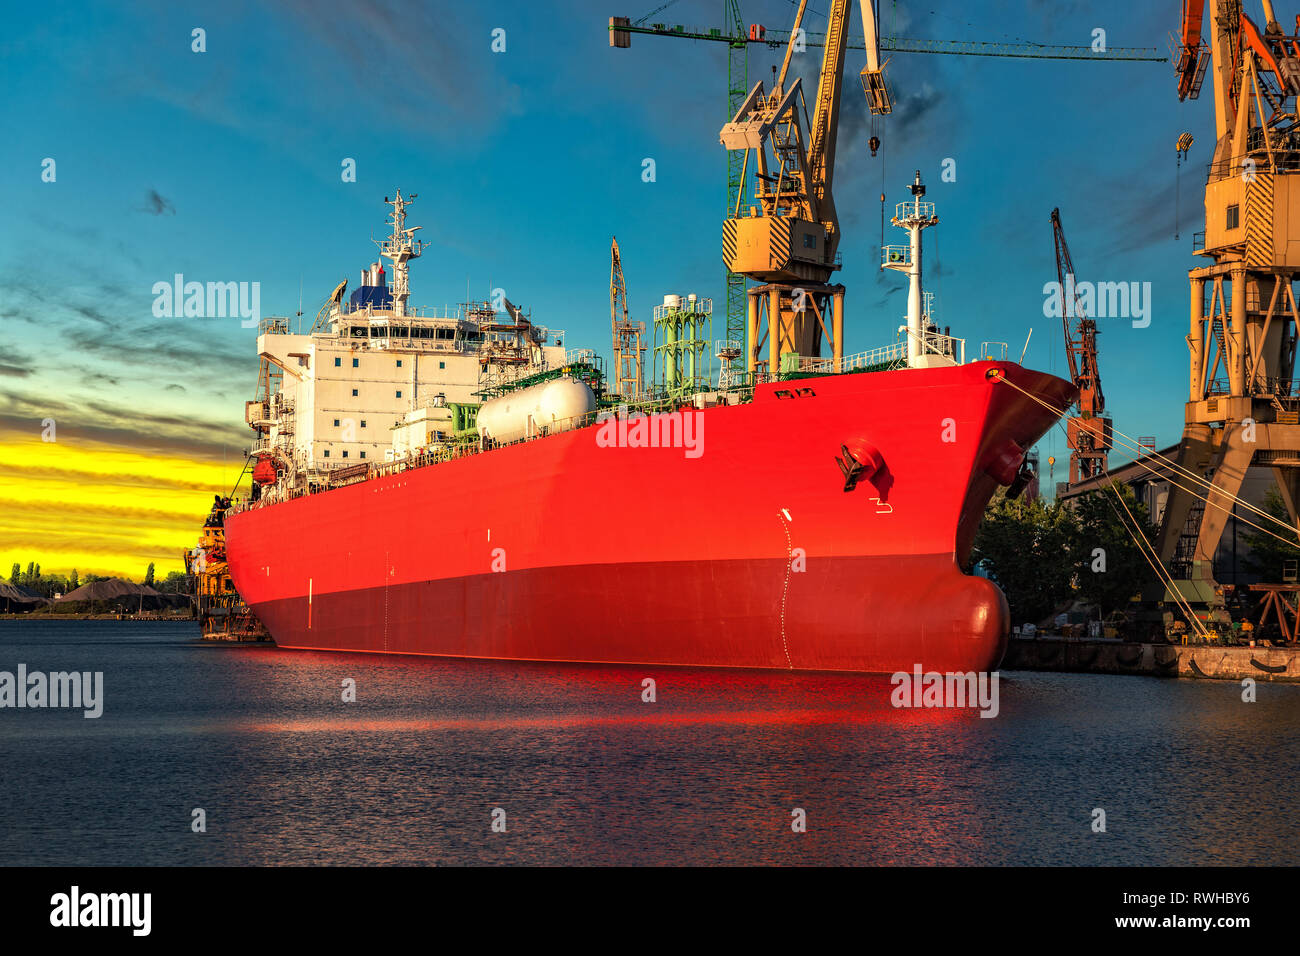 Cargo ship in port at sunset time. Stock Photo